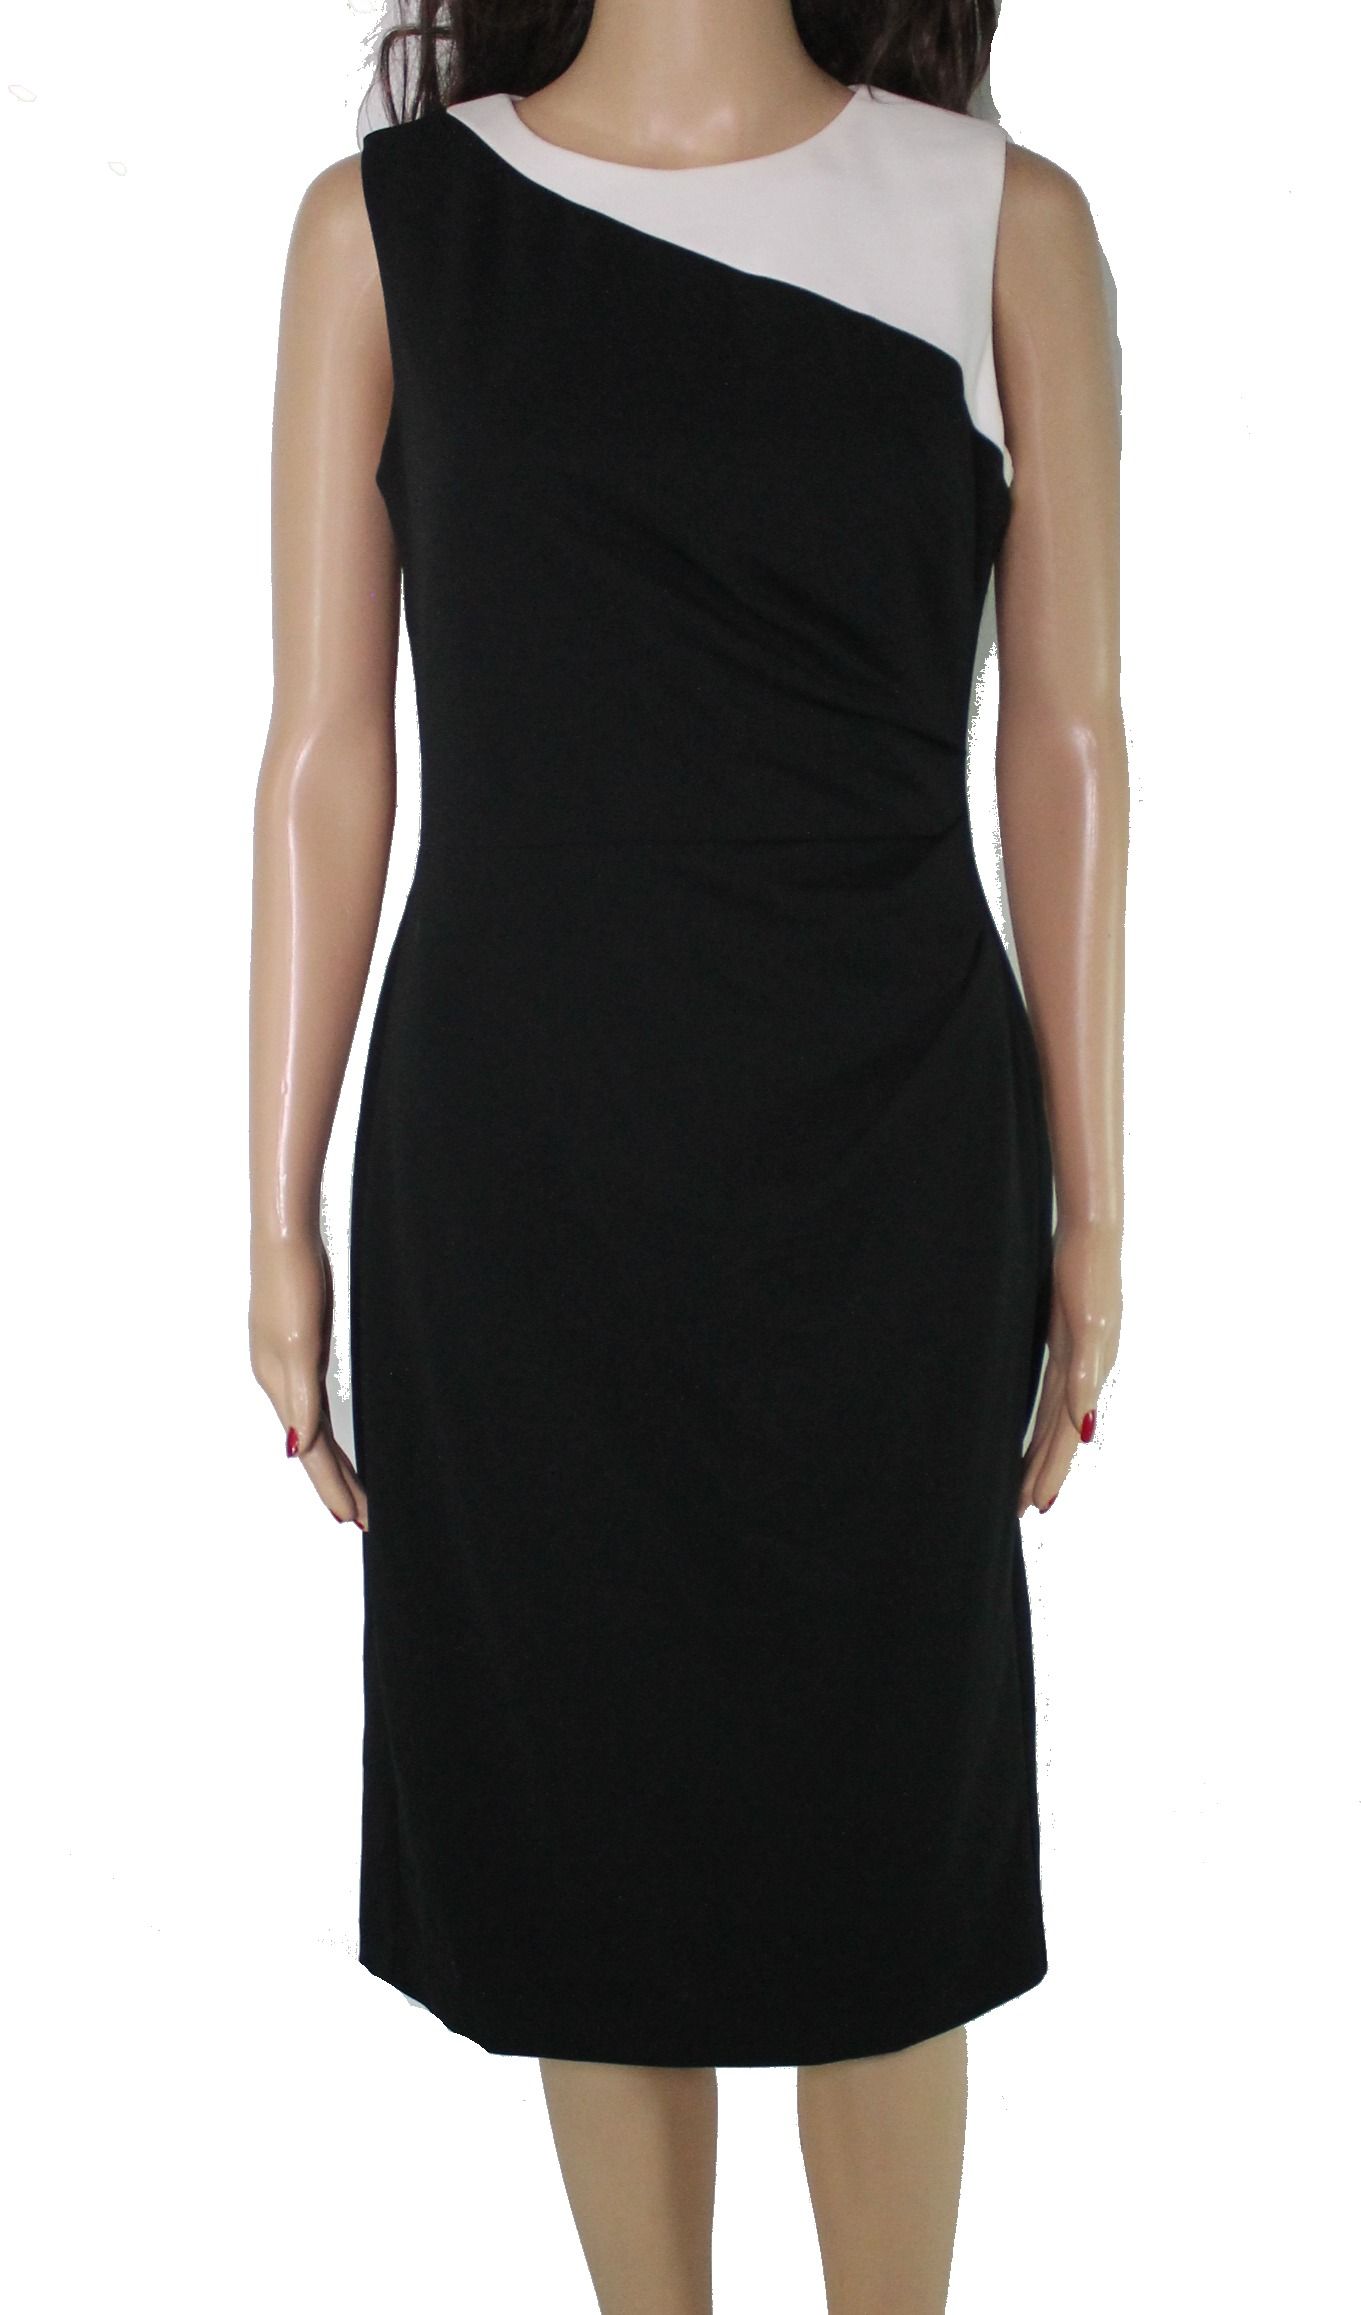 <br>Color: Blacks<br>Size Type: Regular<br>Size (Women's): 4<br>Lined: Yes<br>Sleeve Style: Sleeveless<br>Occasion: Any Occasion<br>Style: Sheath Dress<br>Look: Wedding Guest<br>Dress Length: Knee Length<br>Material: Polyester<br>Zipper: Back Zipper